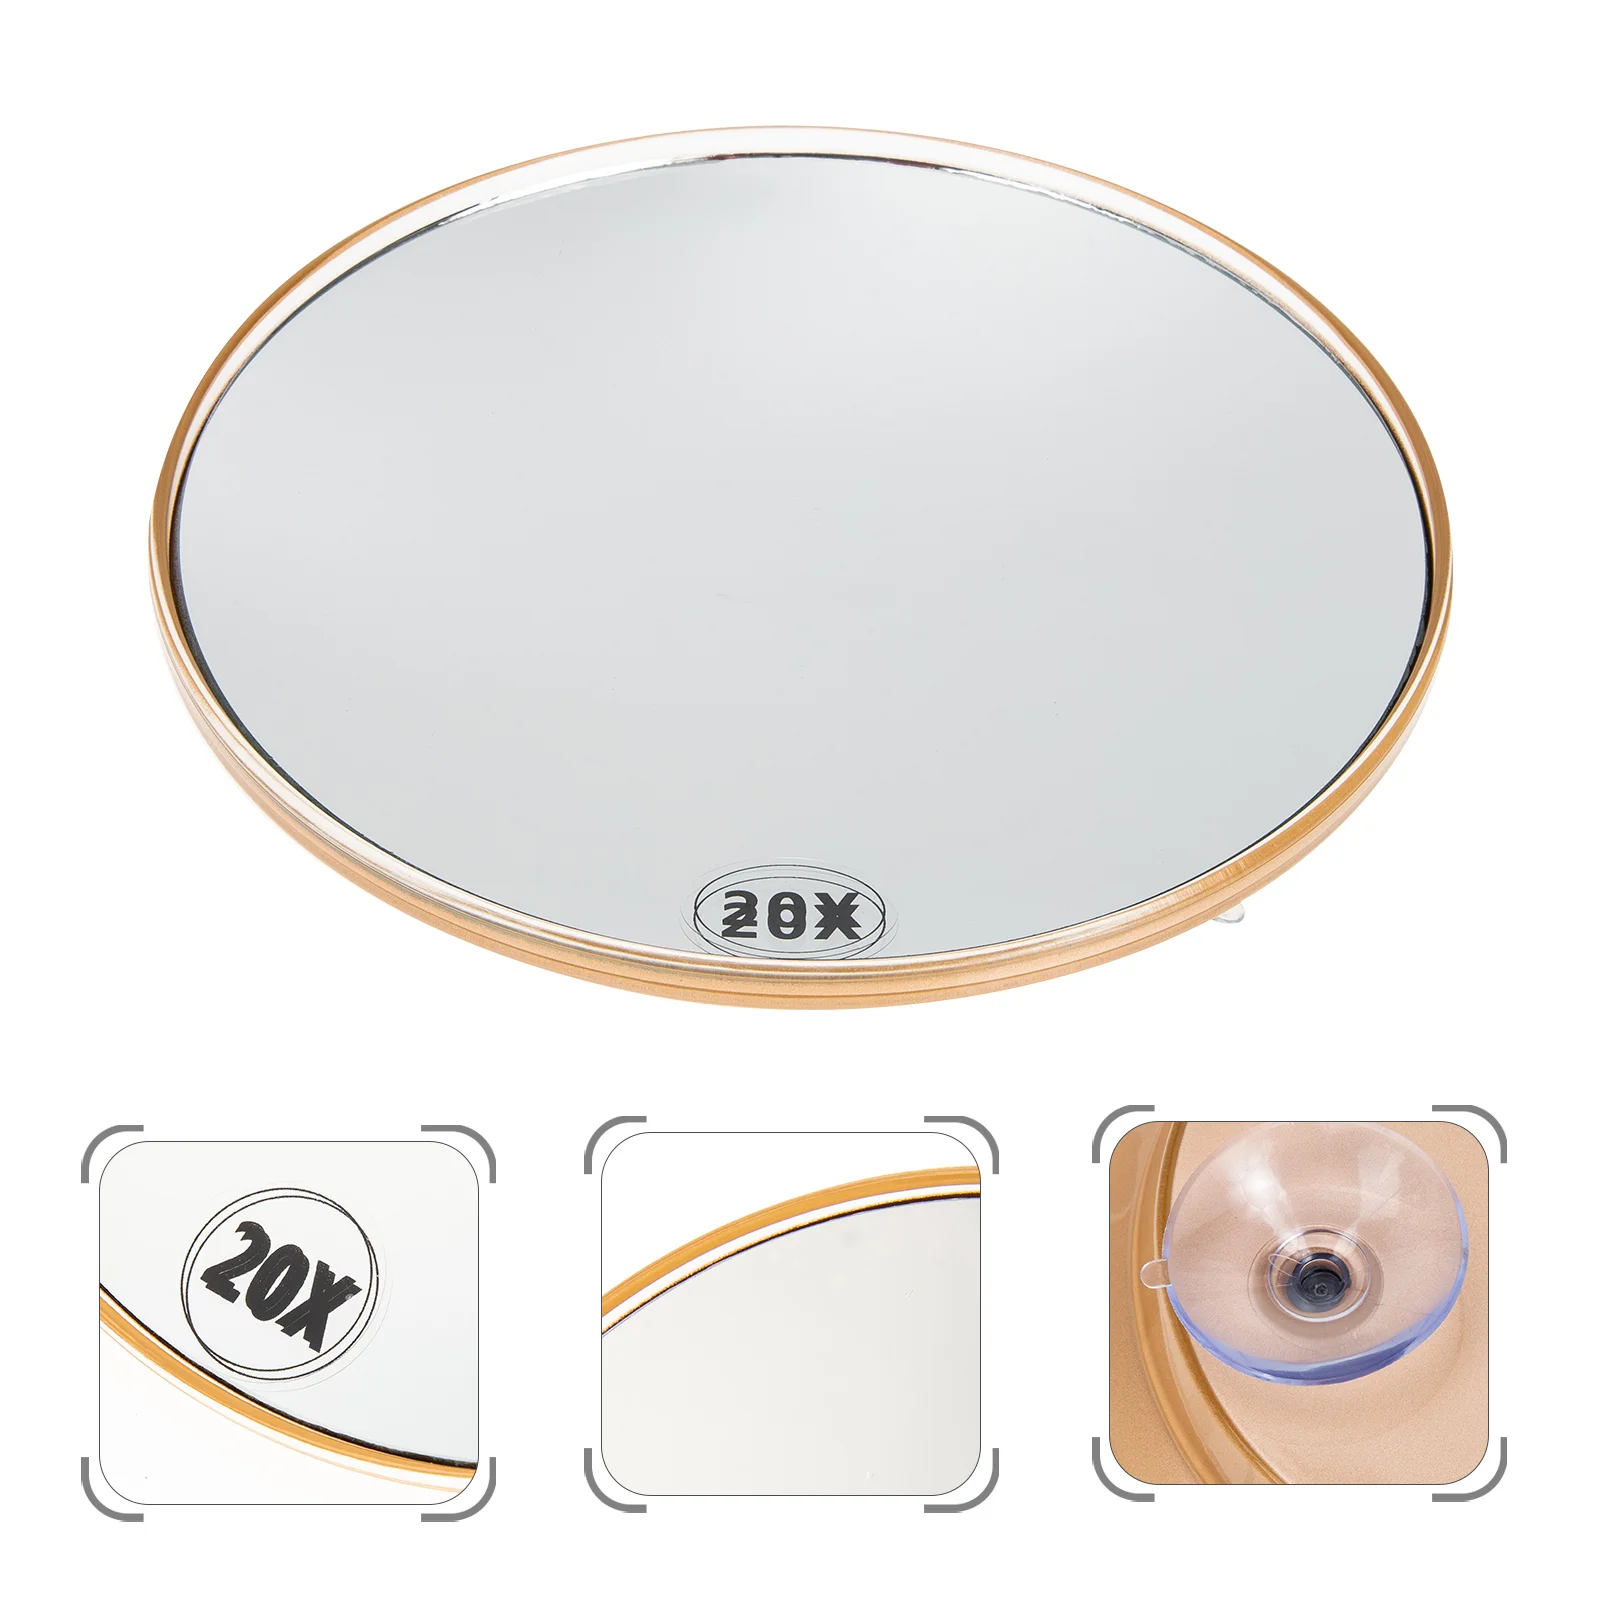 

Mirror Magnifying Suction Makeup Bathroom 20X Cup Cups Wall Travel Make Vanity Up Magnification Mirrors Woman Round Hanging